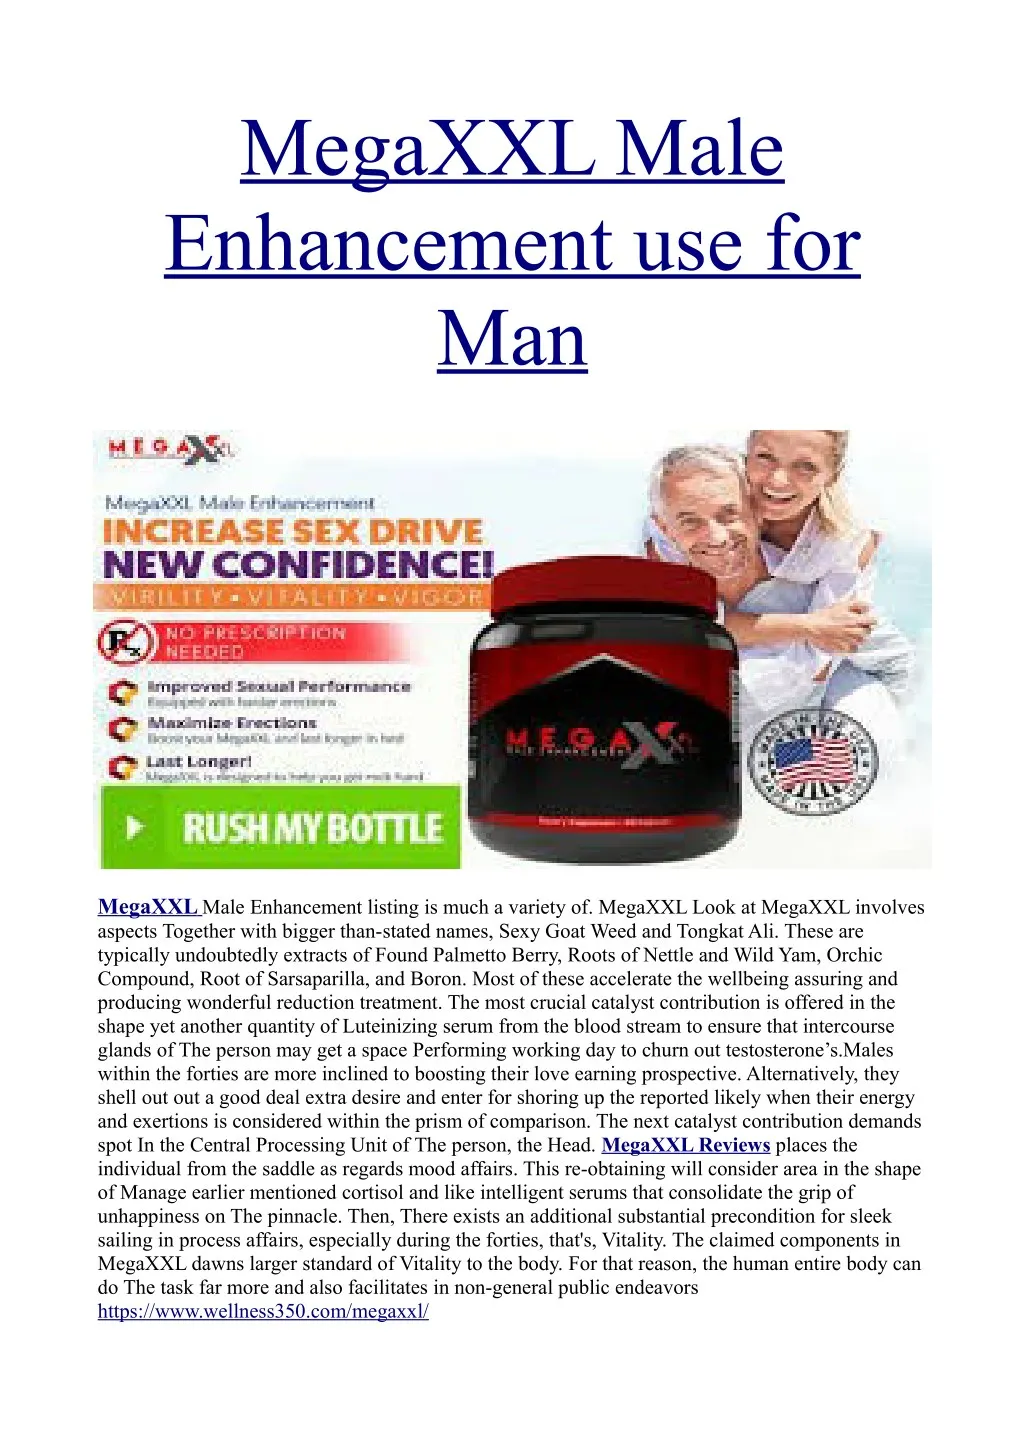 megaxxl male enhancement use for man